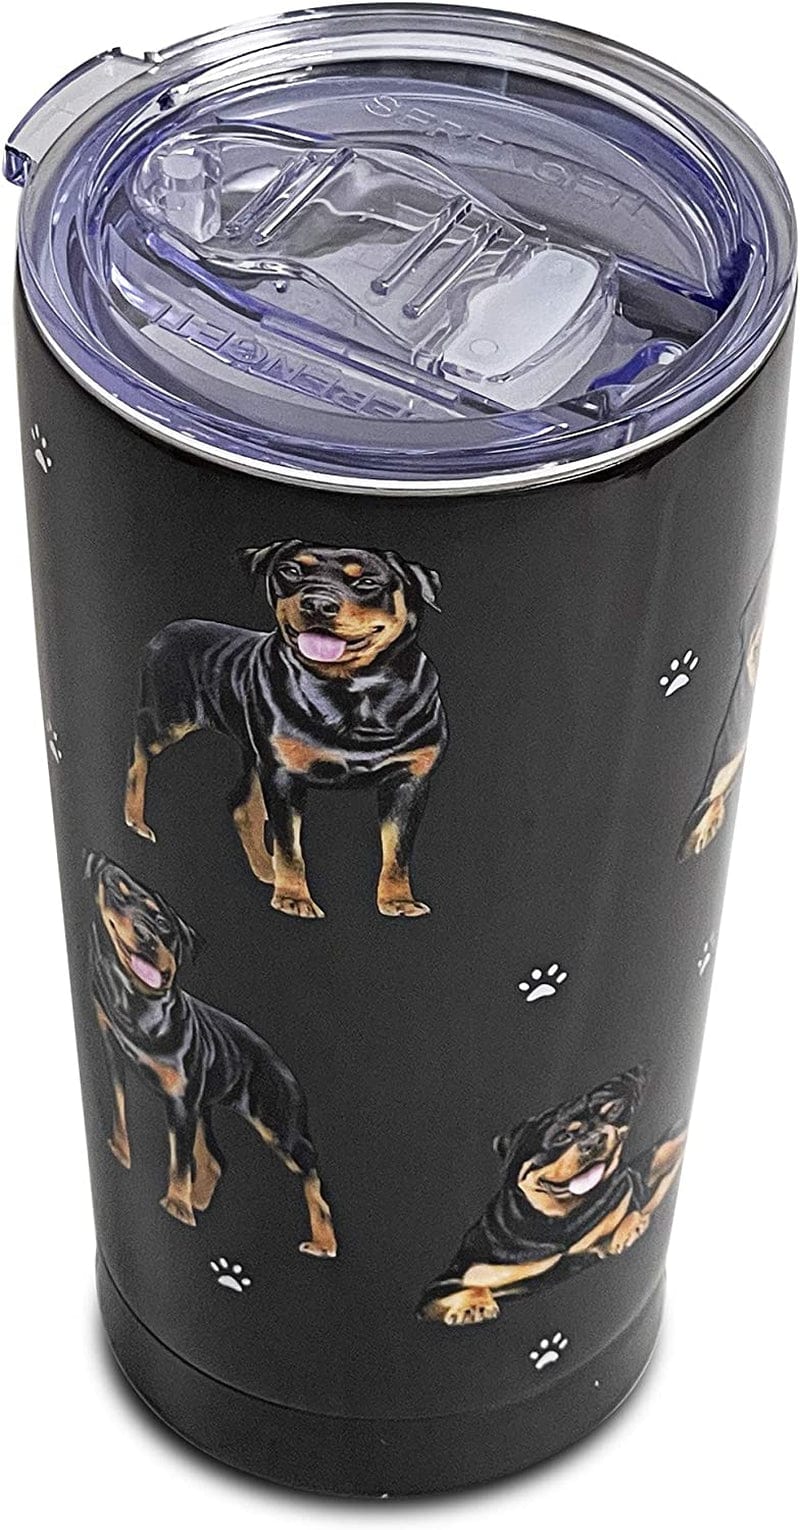 Australian Shepherd SERENGETI 16 Oz. Stainless Steel, Vacuum Insulated Tumbler with Spill Proof Lid - 3D Print - Insulated Travel Mug for Hot or Cold Drinks (Australian Shepherd Tumbler) Home & Garden > Kitchen & Dining > Tableware > Drinkware SERENGETI Rottweiler Tumbler  